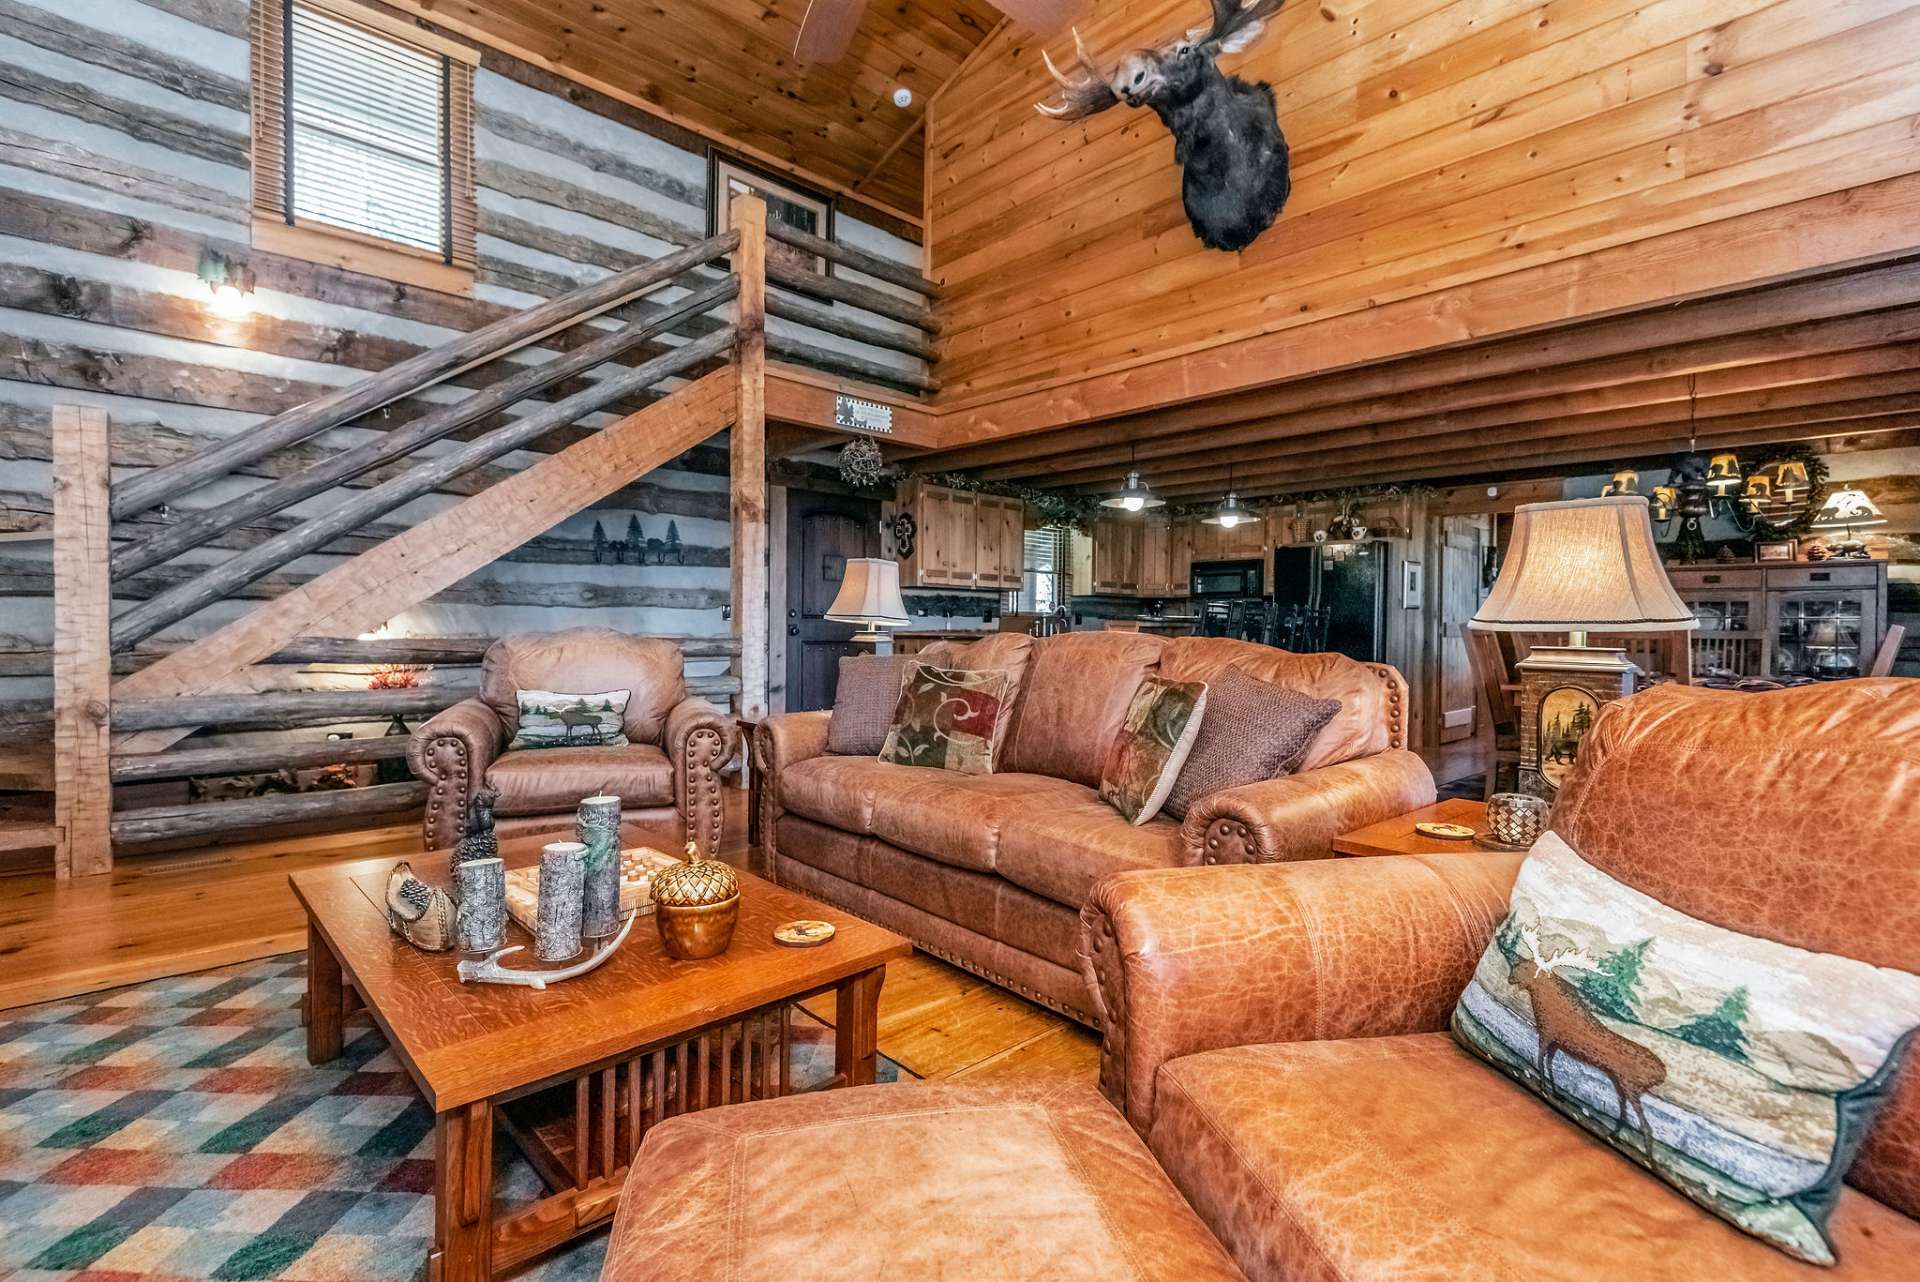 Beautiful log handrail is true to the antique style of this cabin.